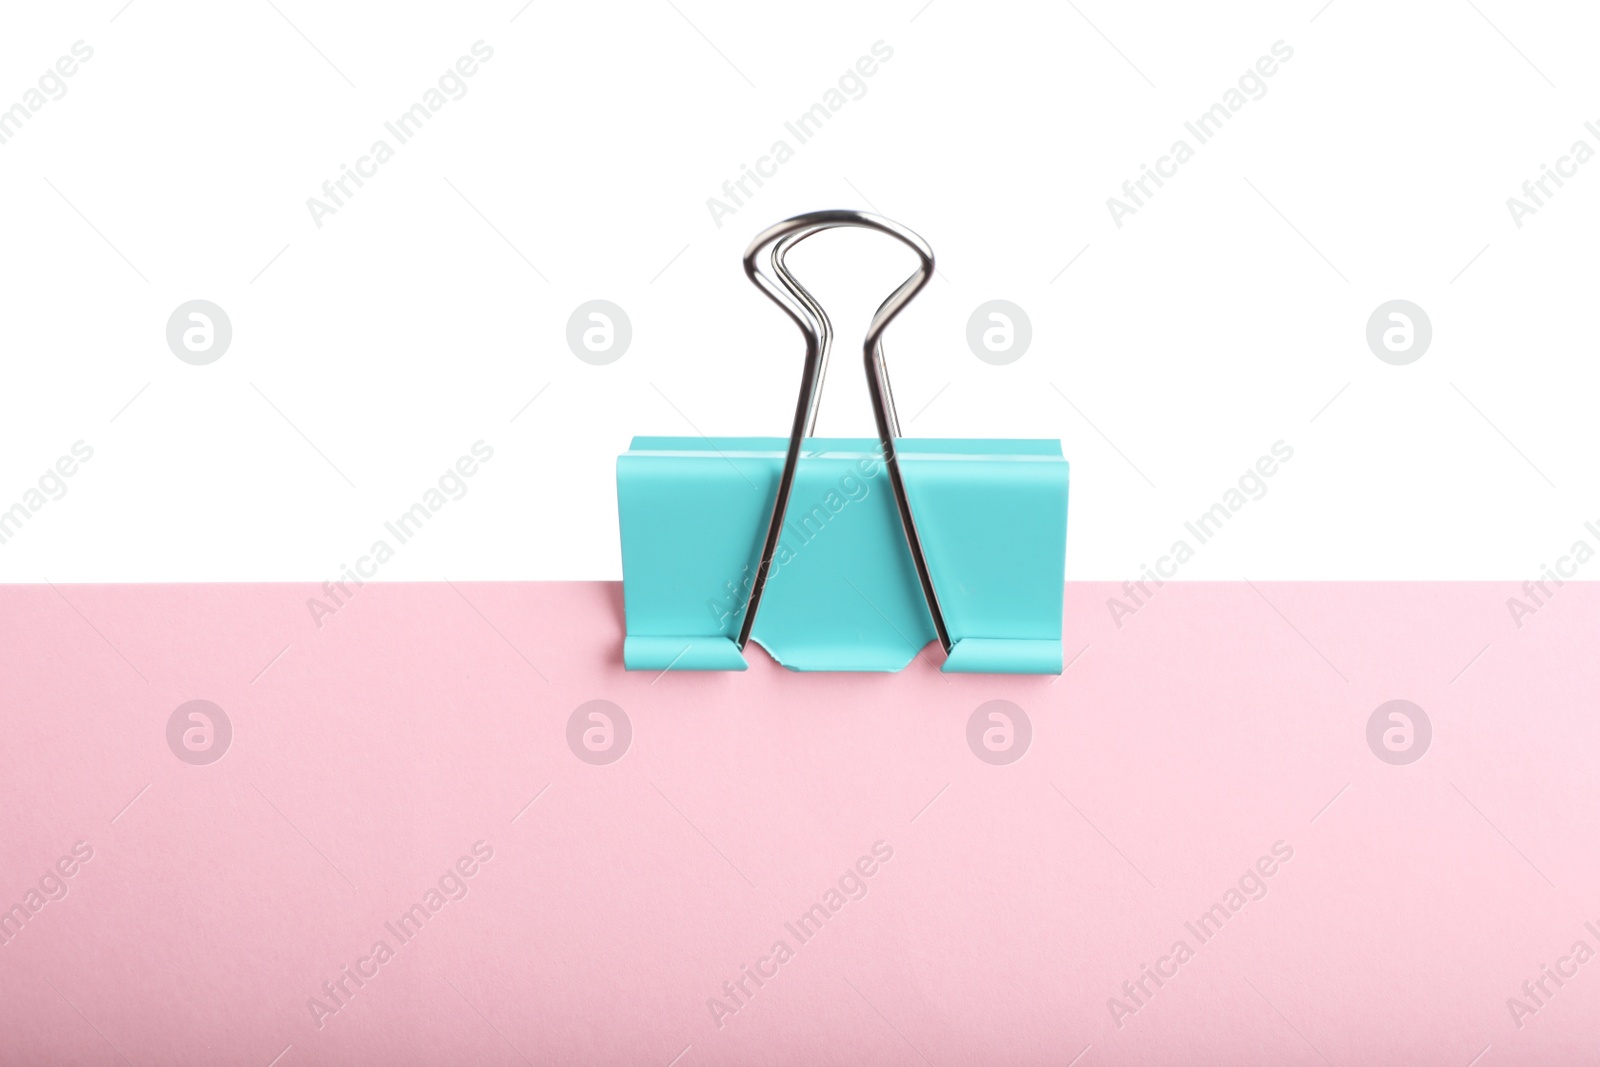 Photo of Pink paper with turquoise binder clip isolated on white